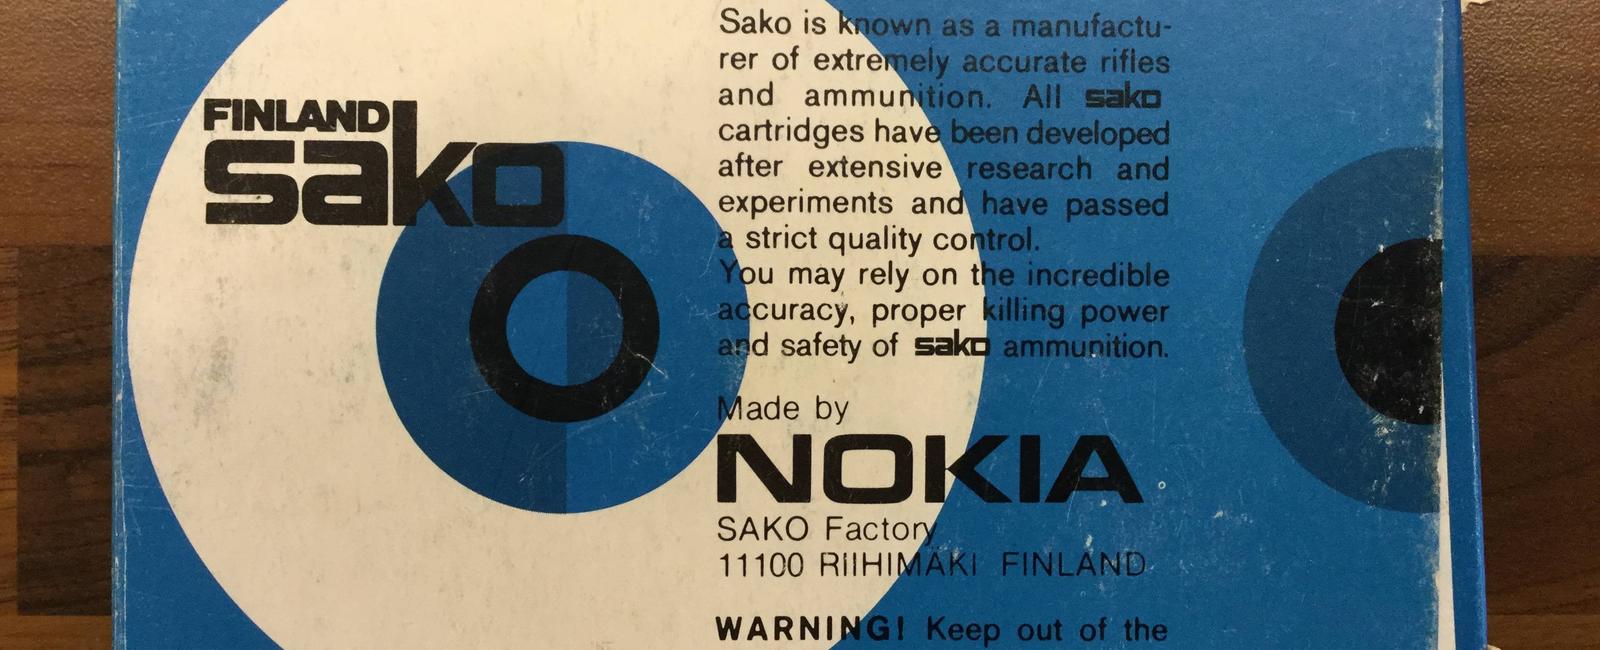 Nokia was once famous as a manufacturer of toilet paper